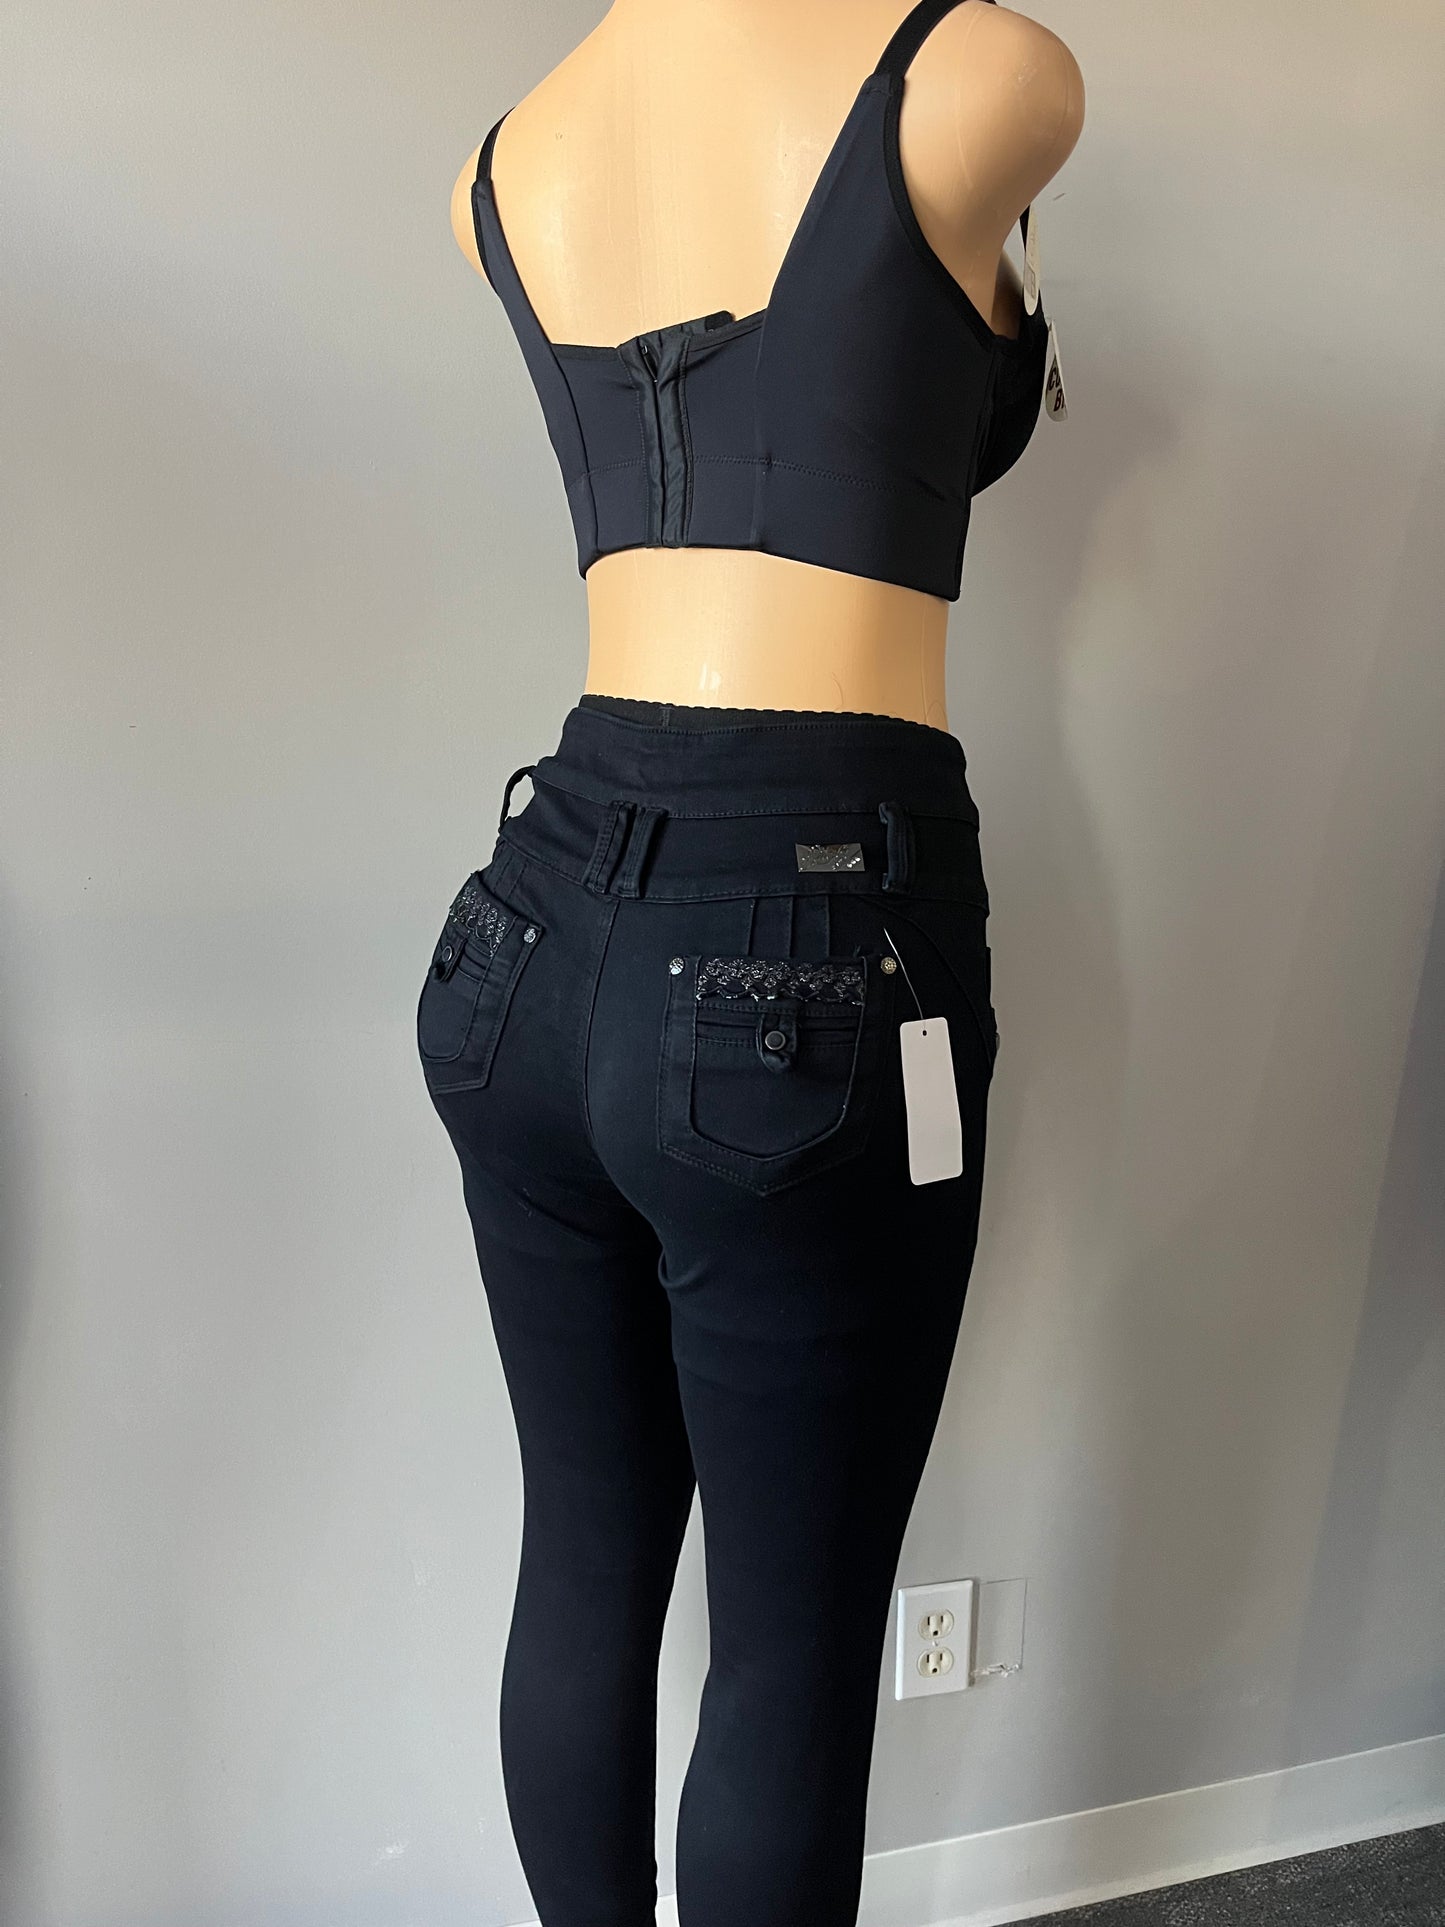 Colombian Jeans Black 4 Buttons Booty-Lift